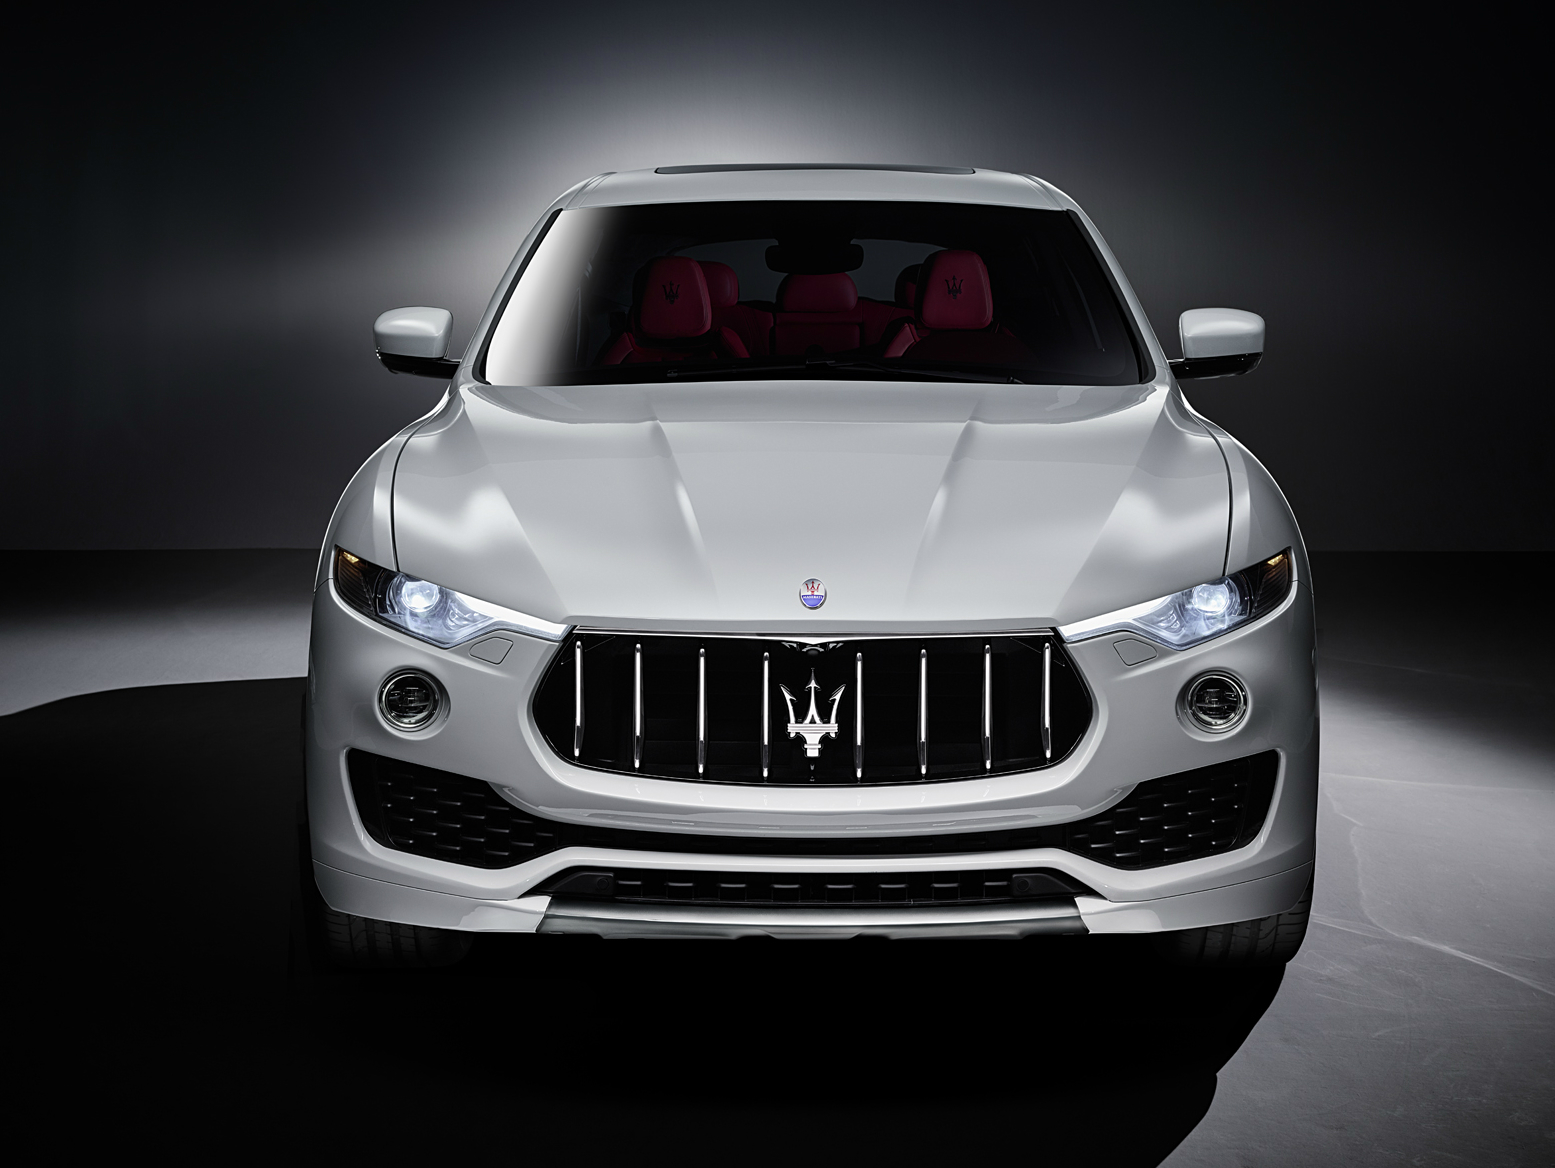 Maserati Levante is one of the star cars of the 2016 Geneva motor show